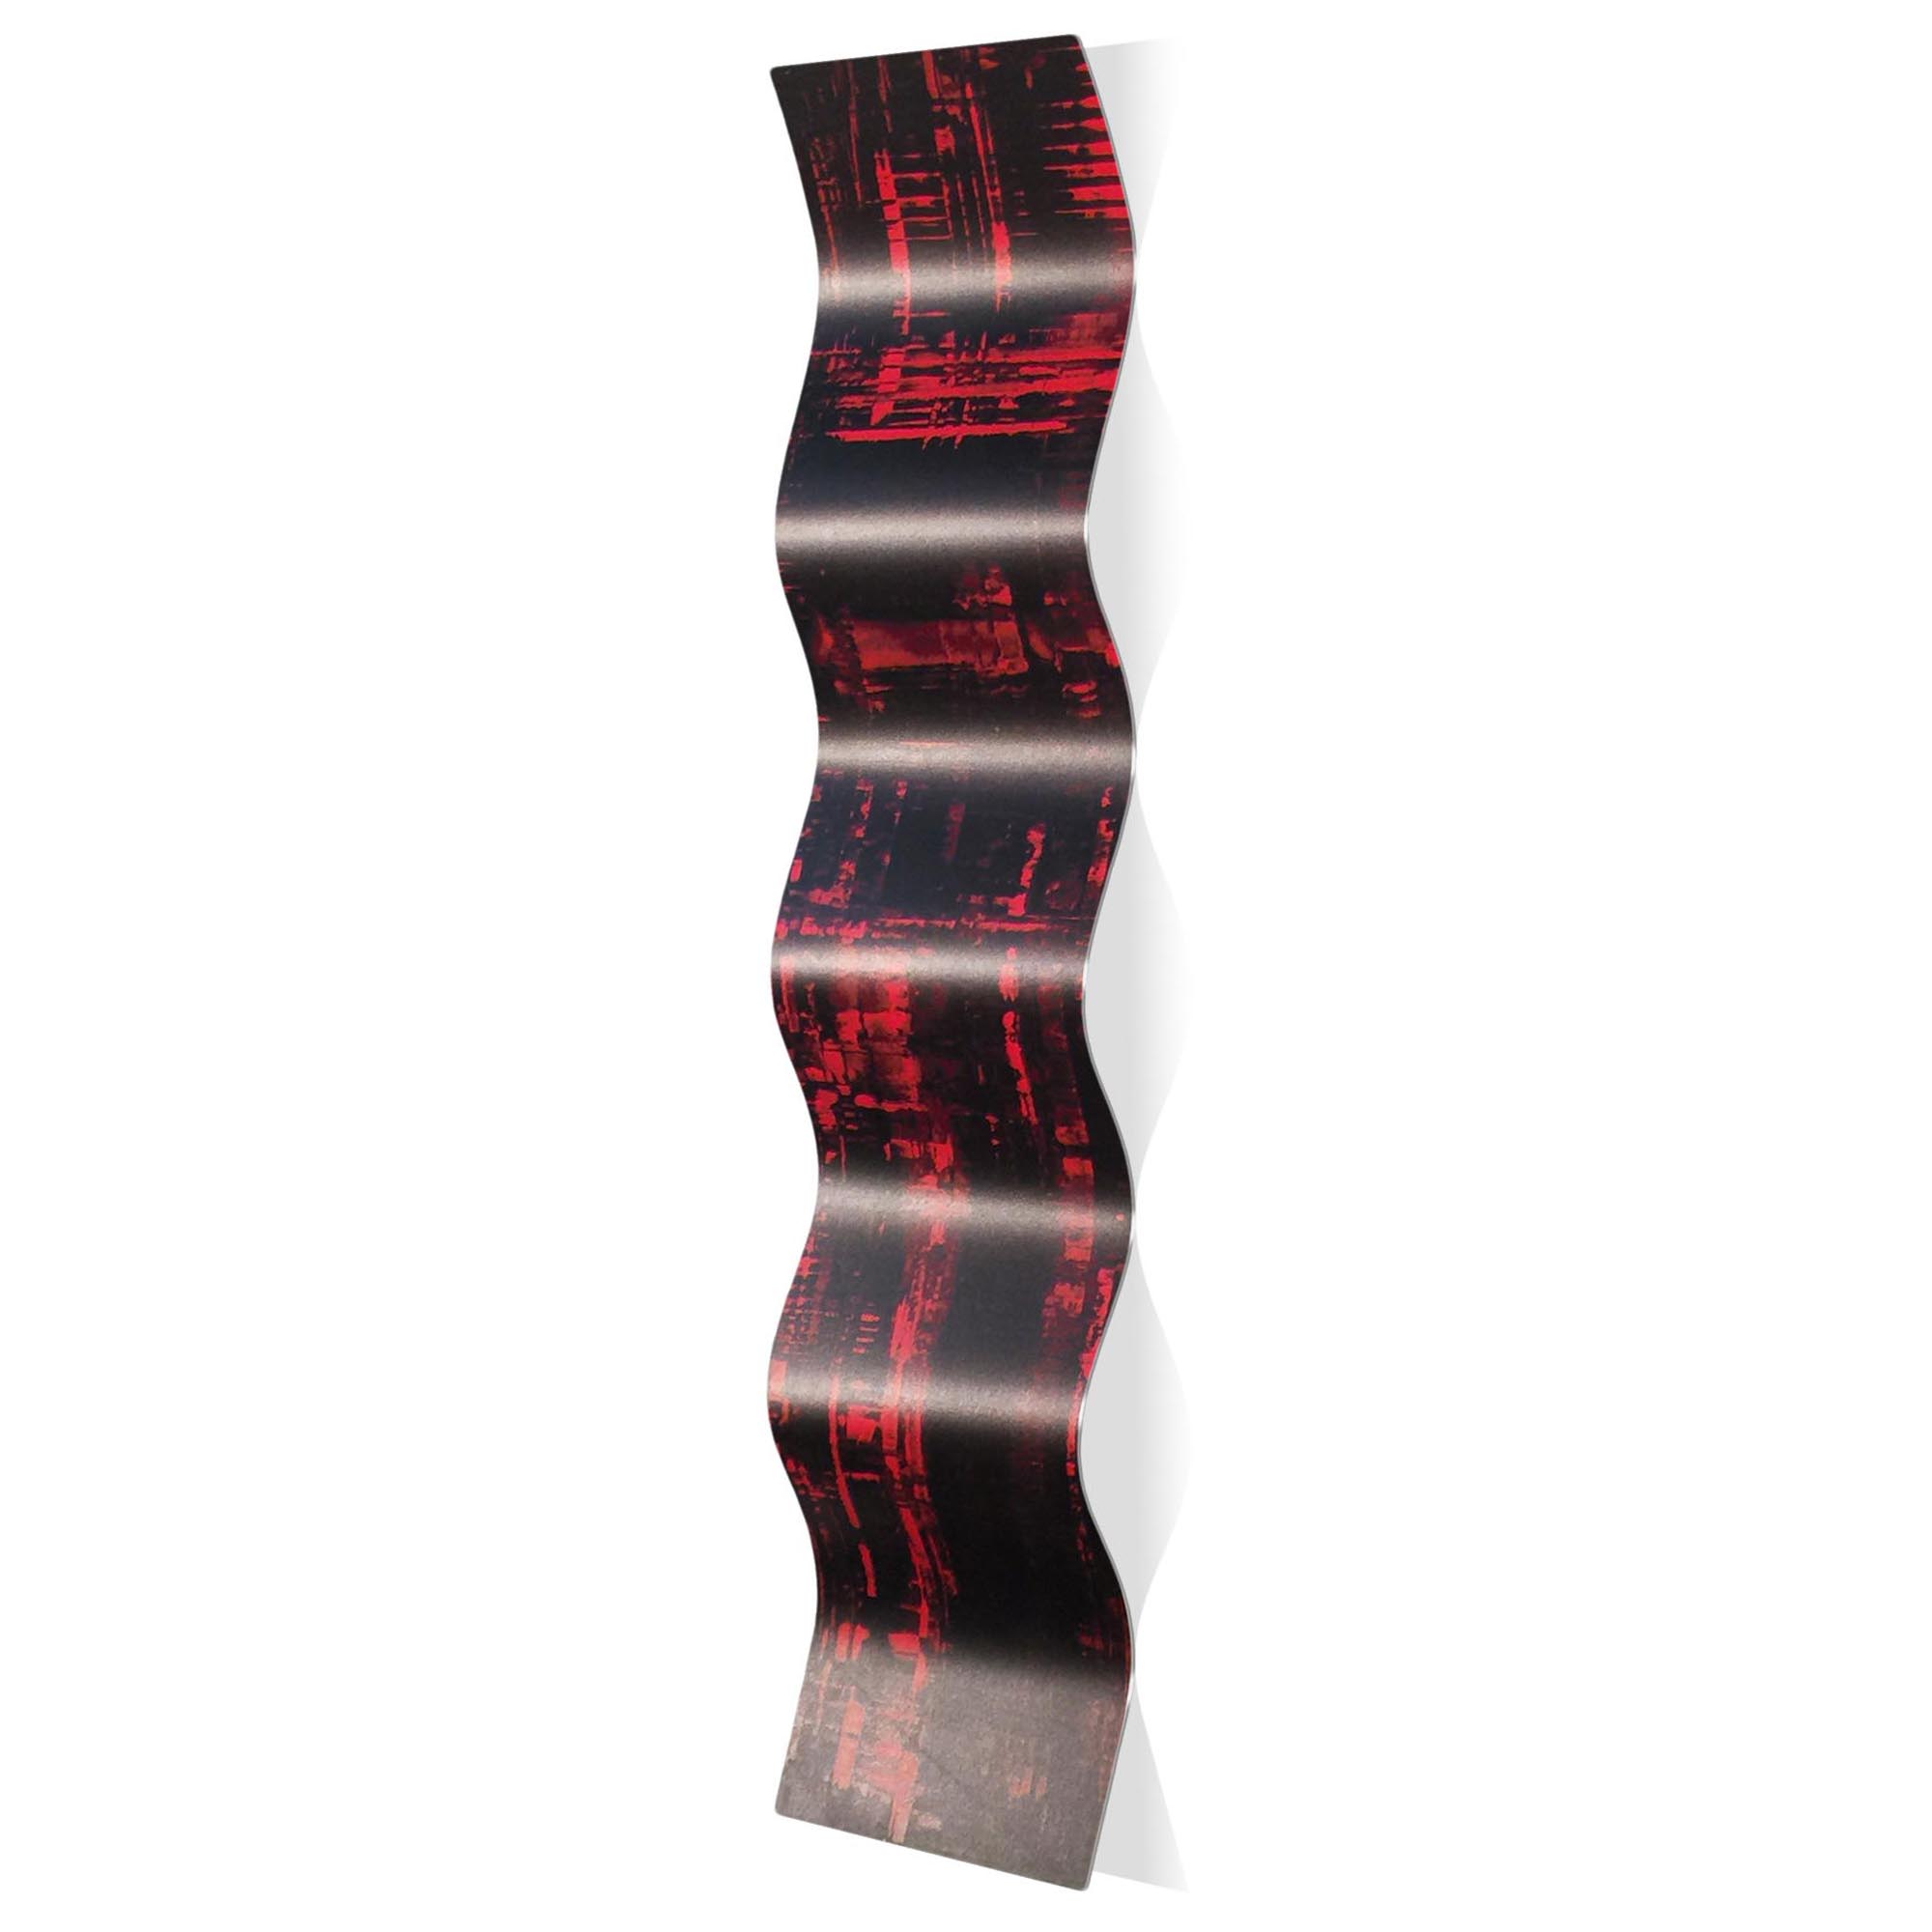 Aporia Red Wave 9.5x44in. Metal Eclectic Decor